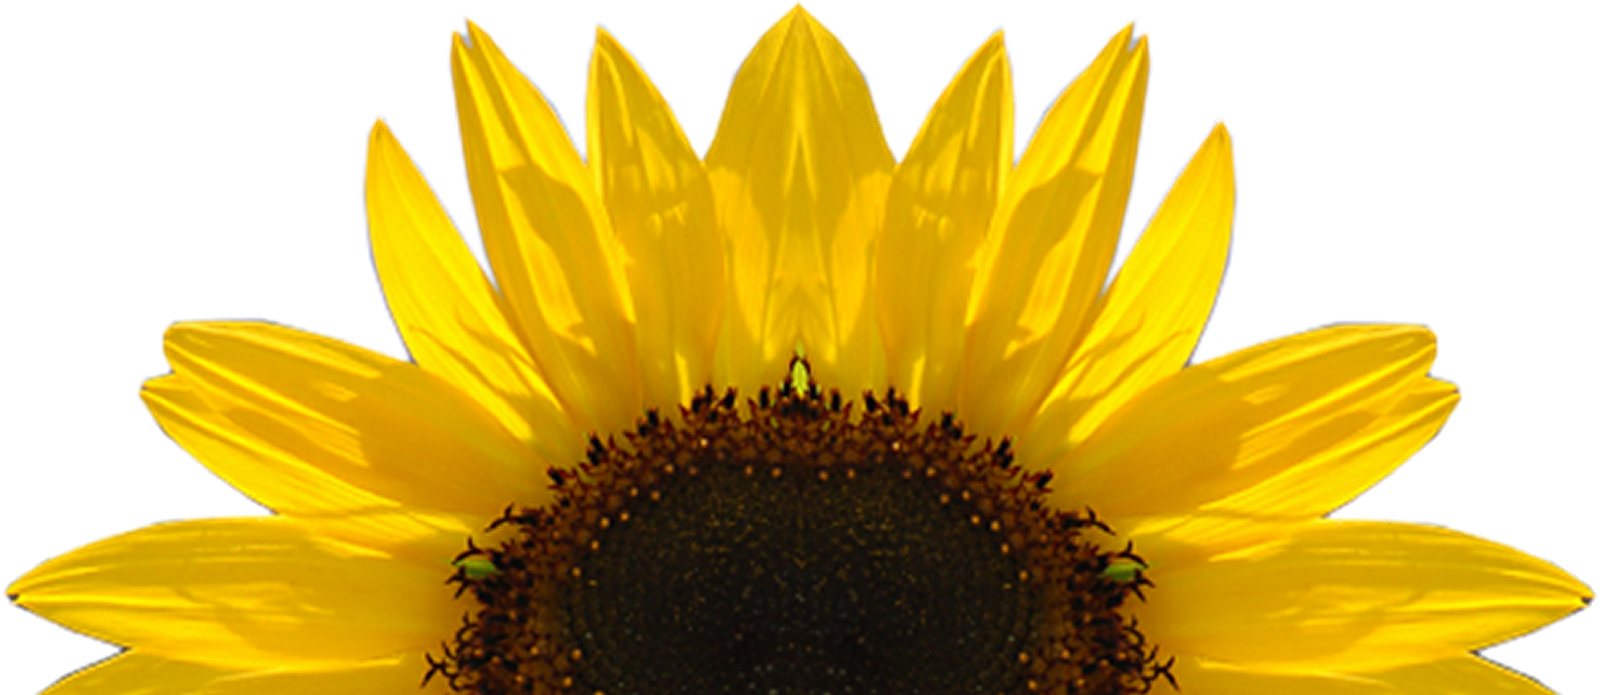 Sunflowers Png Image #28740 - Sunflowers, Transparent background PNG HD thumbnail